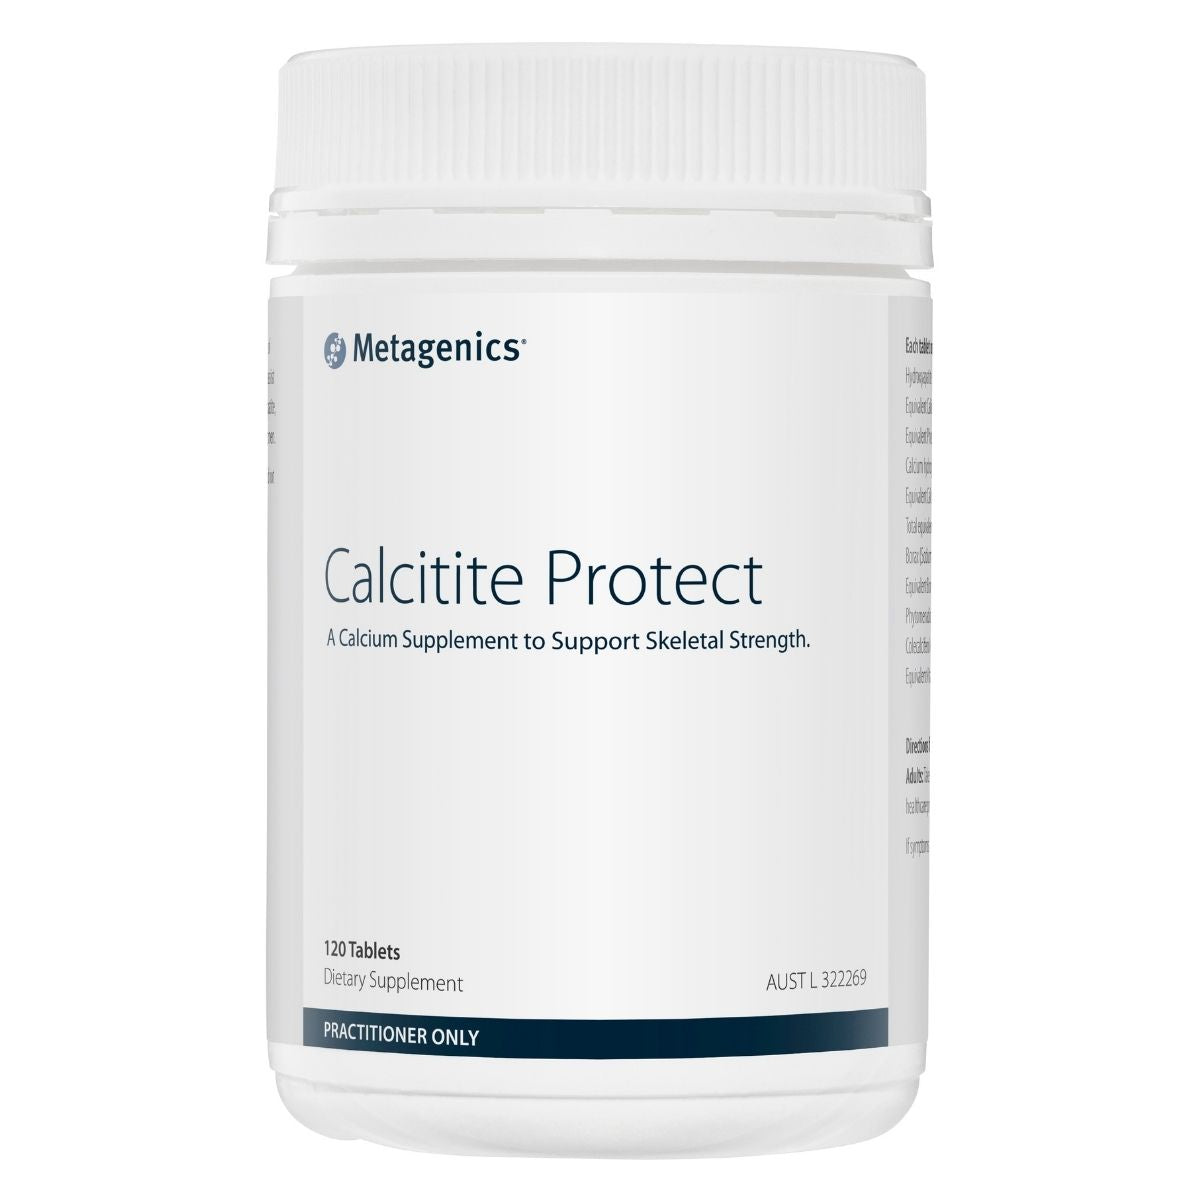 Metagenics Calcitite Protect 120 tablets | Vitality and Wellness Centre